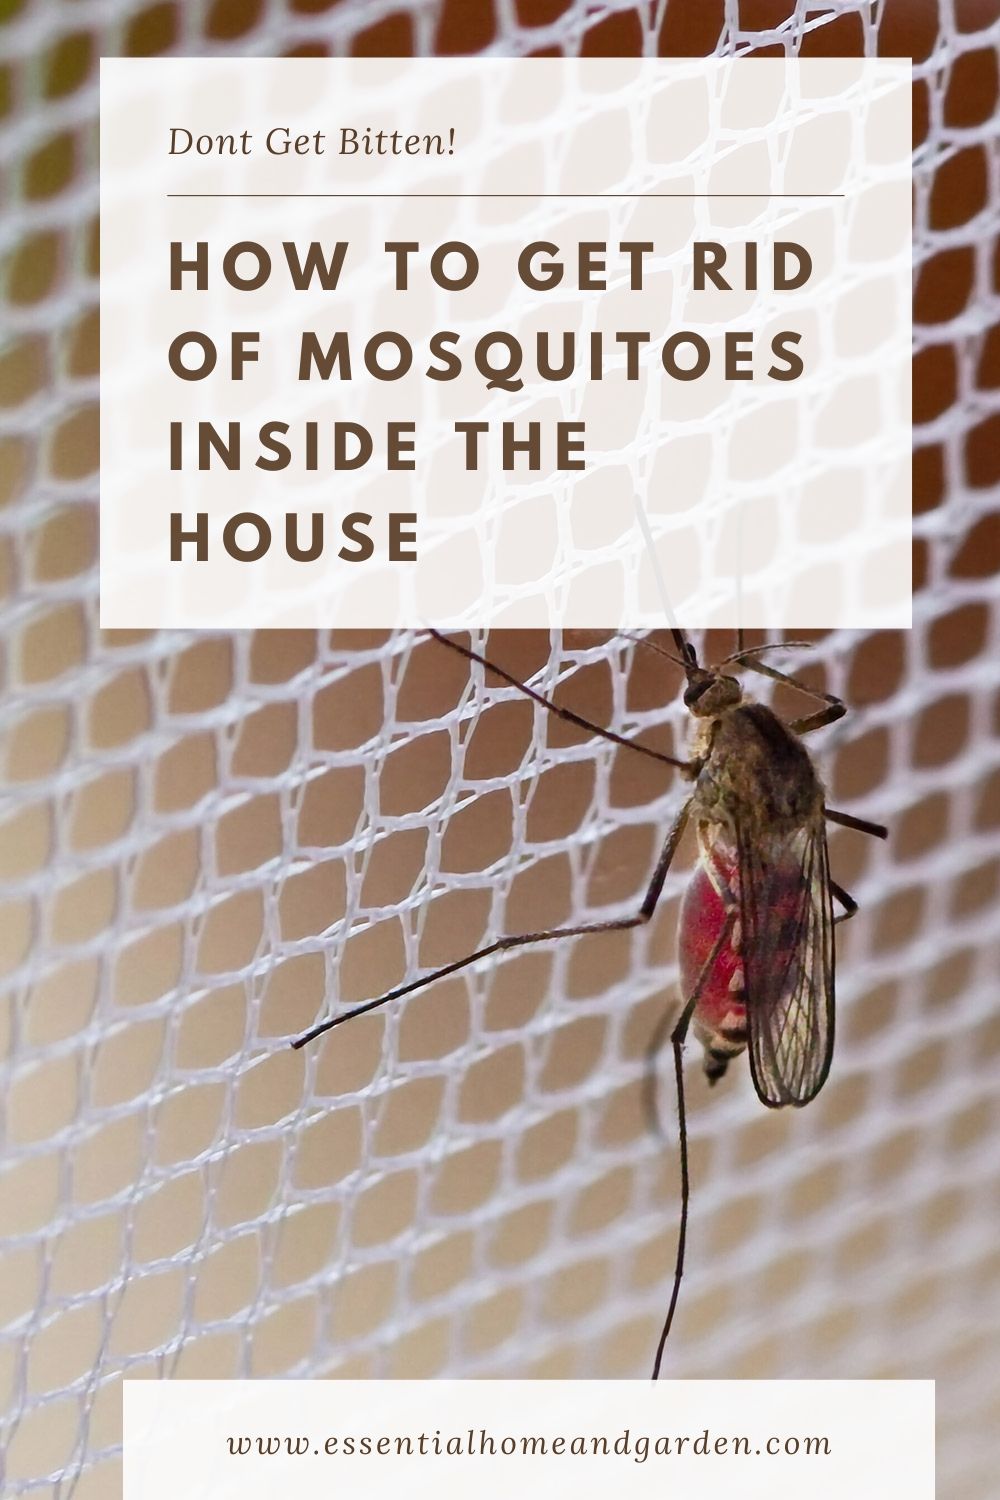 How can i get rid of mosquitoes inside my house How To Kill Mosquitoes In Your House Easy Guide Pestions Com